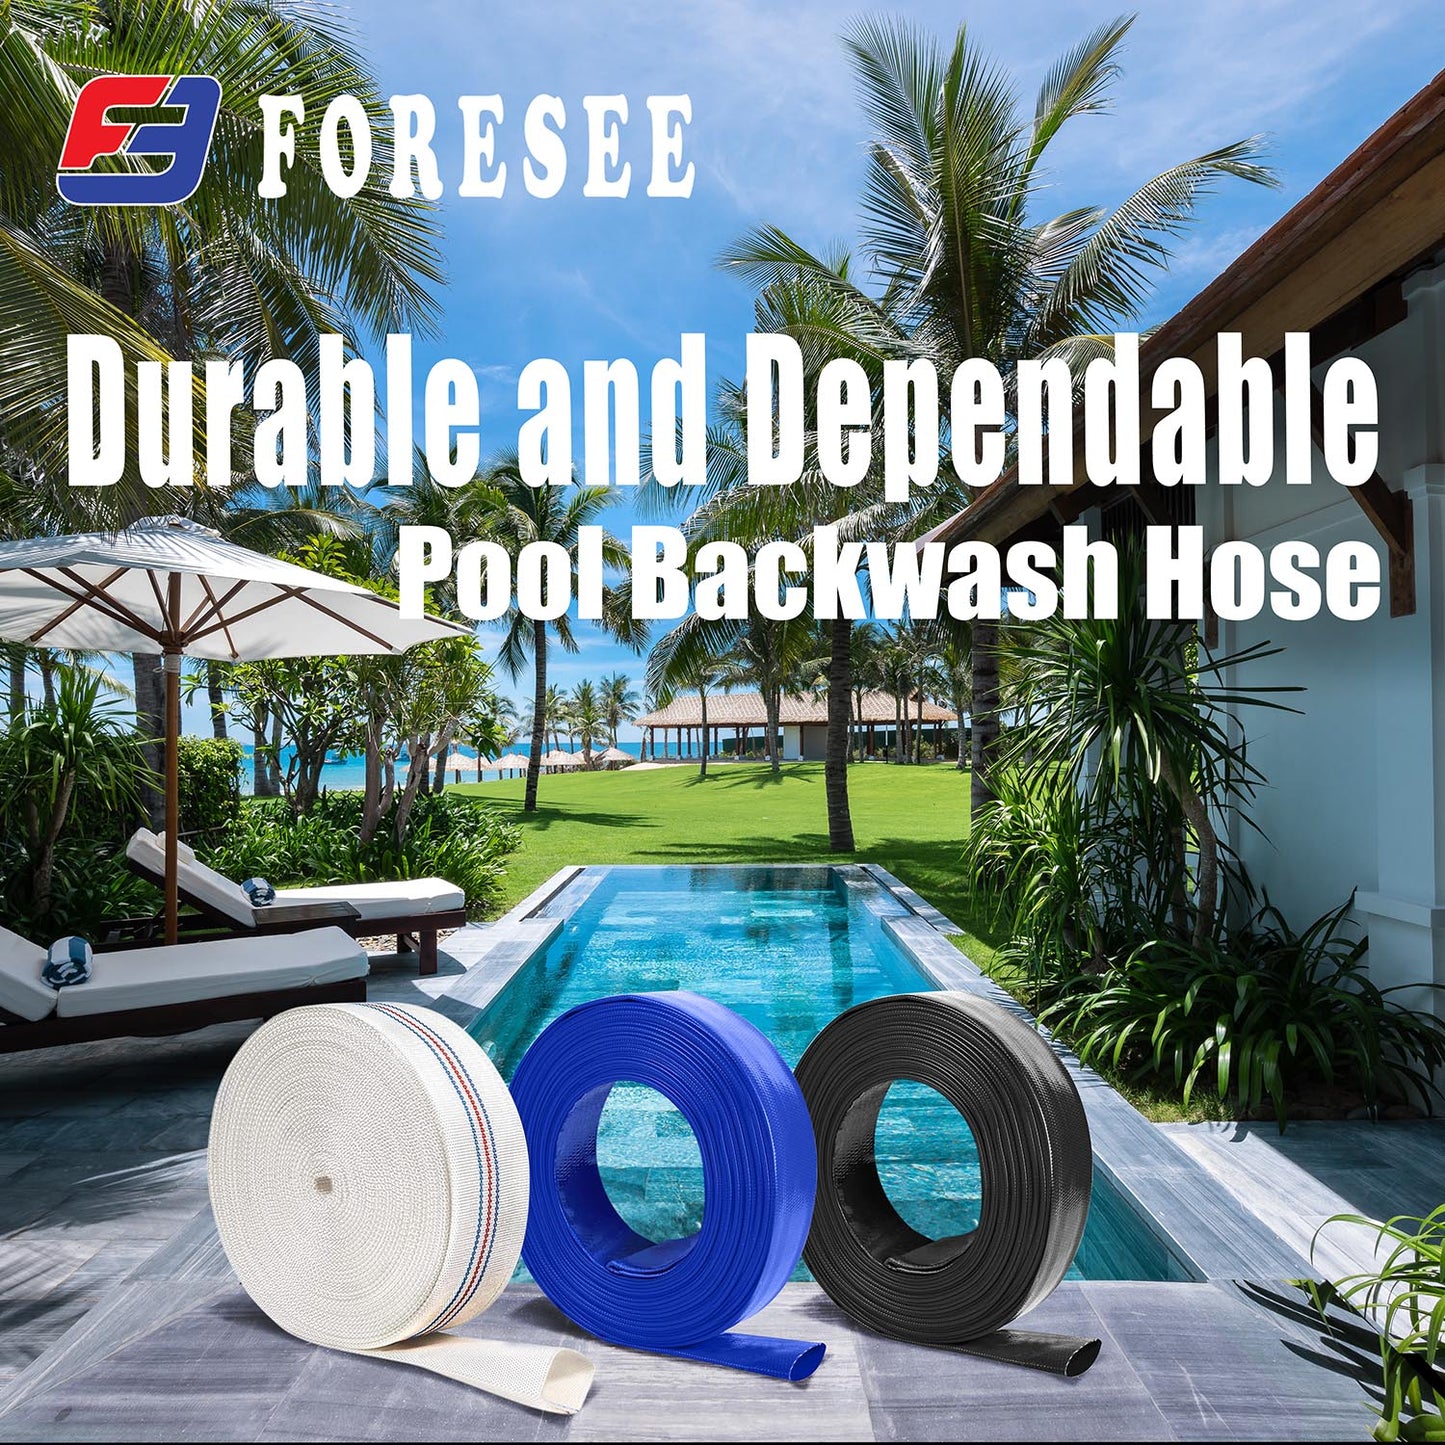 Water Discharge Backwash Pool Hose 1-1/2" 1.5" in inch x 100 FT White (Open Box)